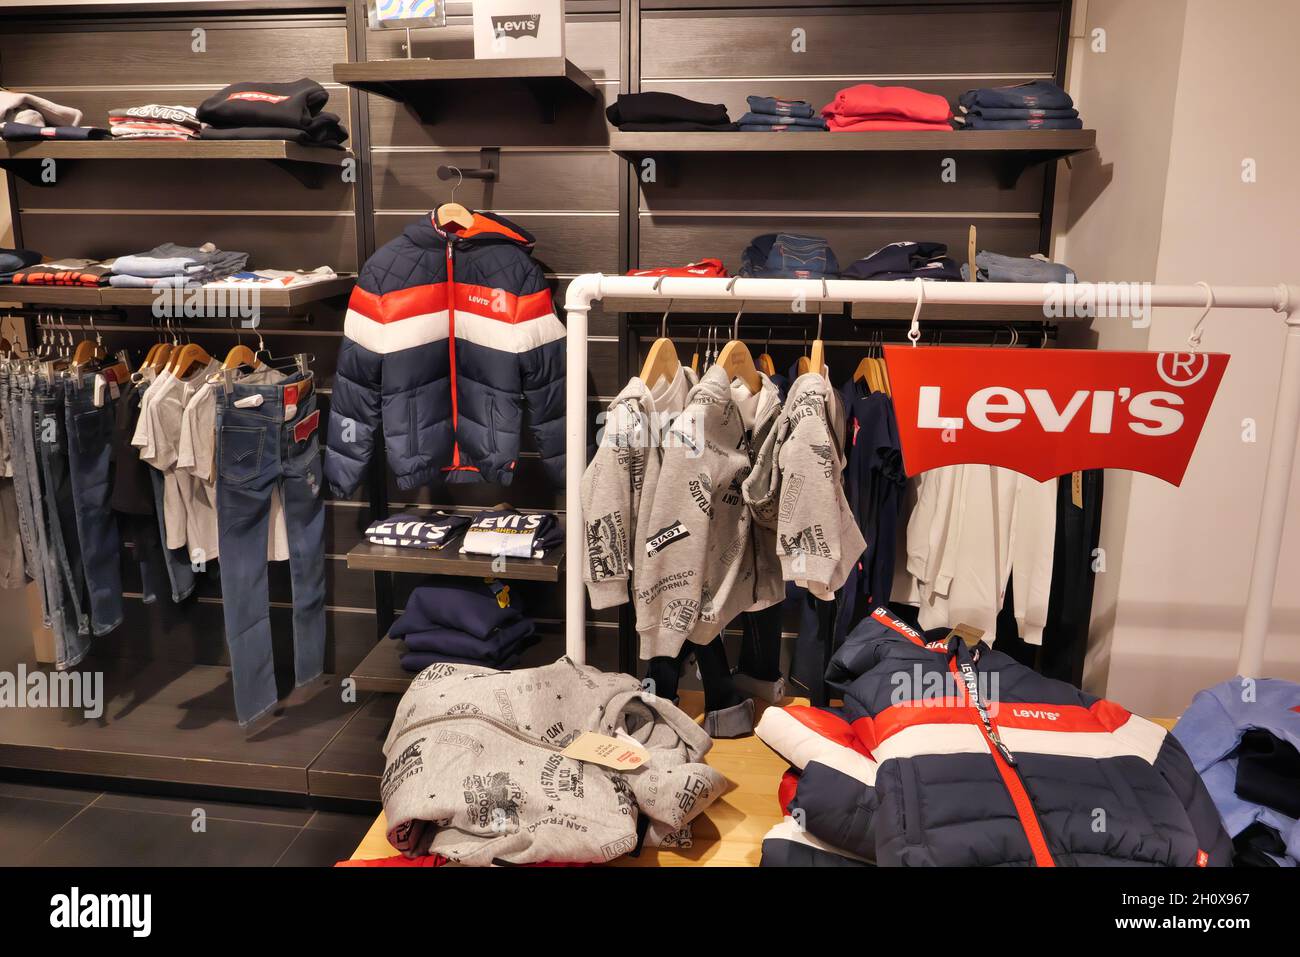 LEVIS CLOTHING ON DISPLAY INSIDE THE FASHION STORE Stock Photo